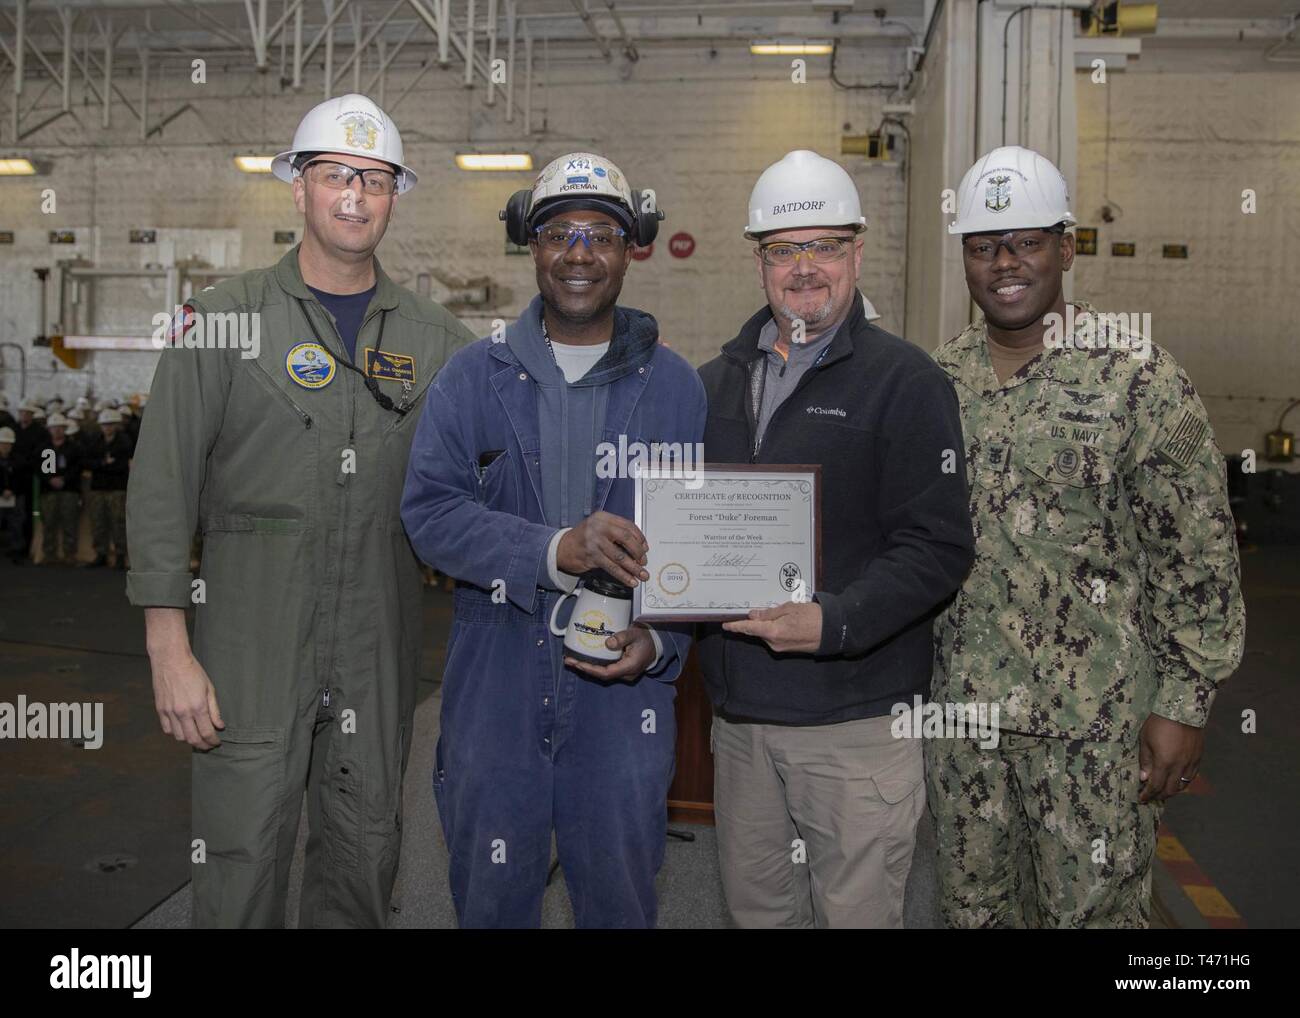 NEWPORT NEWS, Va. (March 14, 2019) Huntington Ingalls Industries-Newport News Shipbuilding employee Forest Foreman receives the Warrior of the Week award for outstanding performance from Capt. John J. Cummings, Ford's commanding officer, Command Master Chief De’Andre Beaufort and Mr. Dave Batdorf, CVN 78 Construction Supervisor during an all-hands call in the ship's hangar bay. Ford is currently undergoing its post-shakedown availability at Huntington Ingalls Industries-Newport News Shipbuilding. Stock Photo